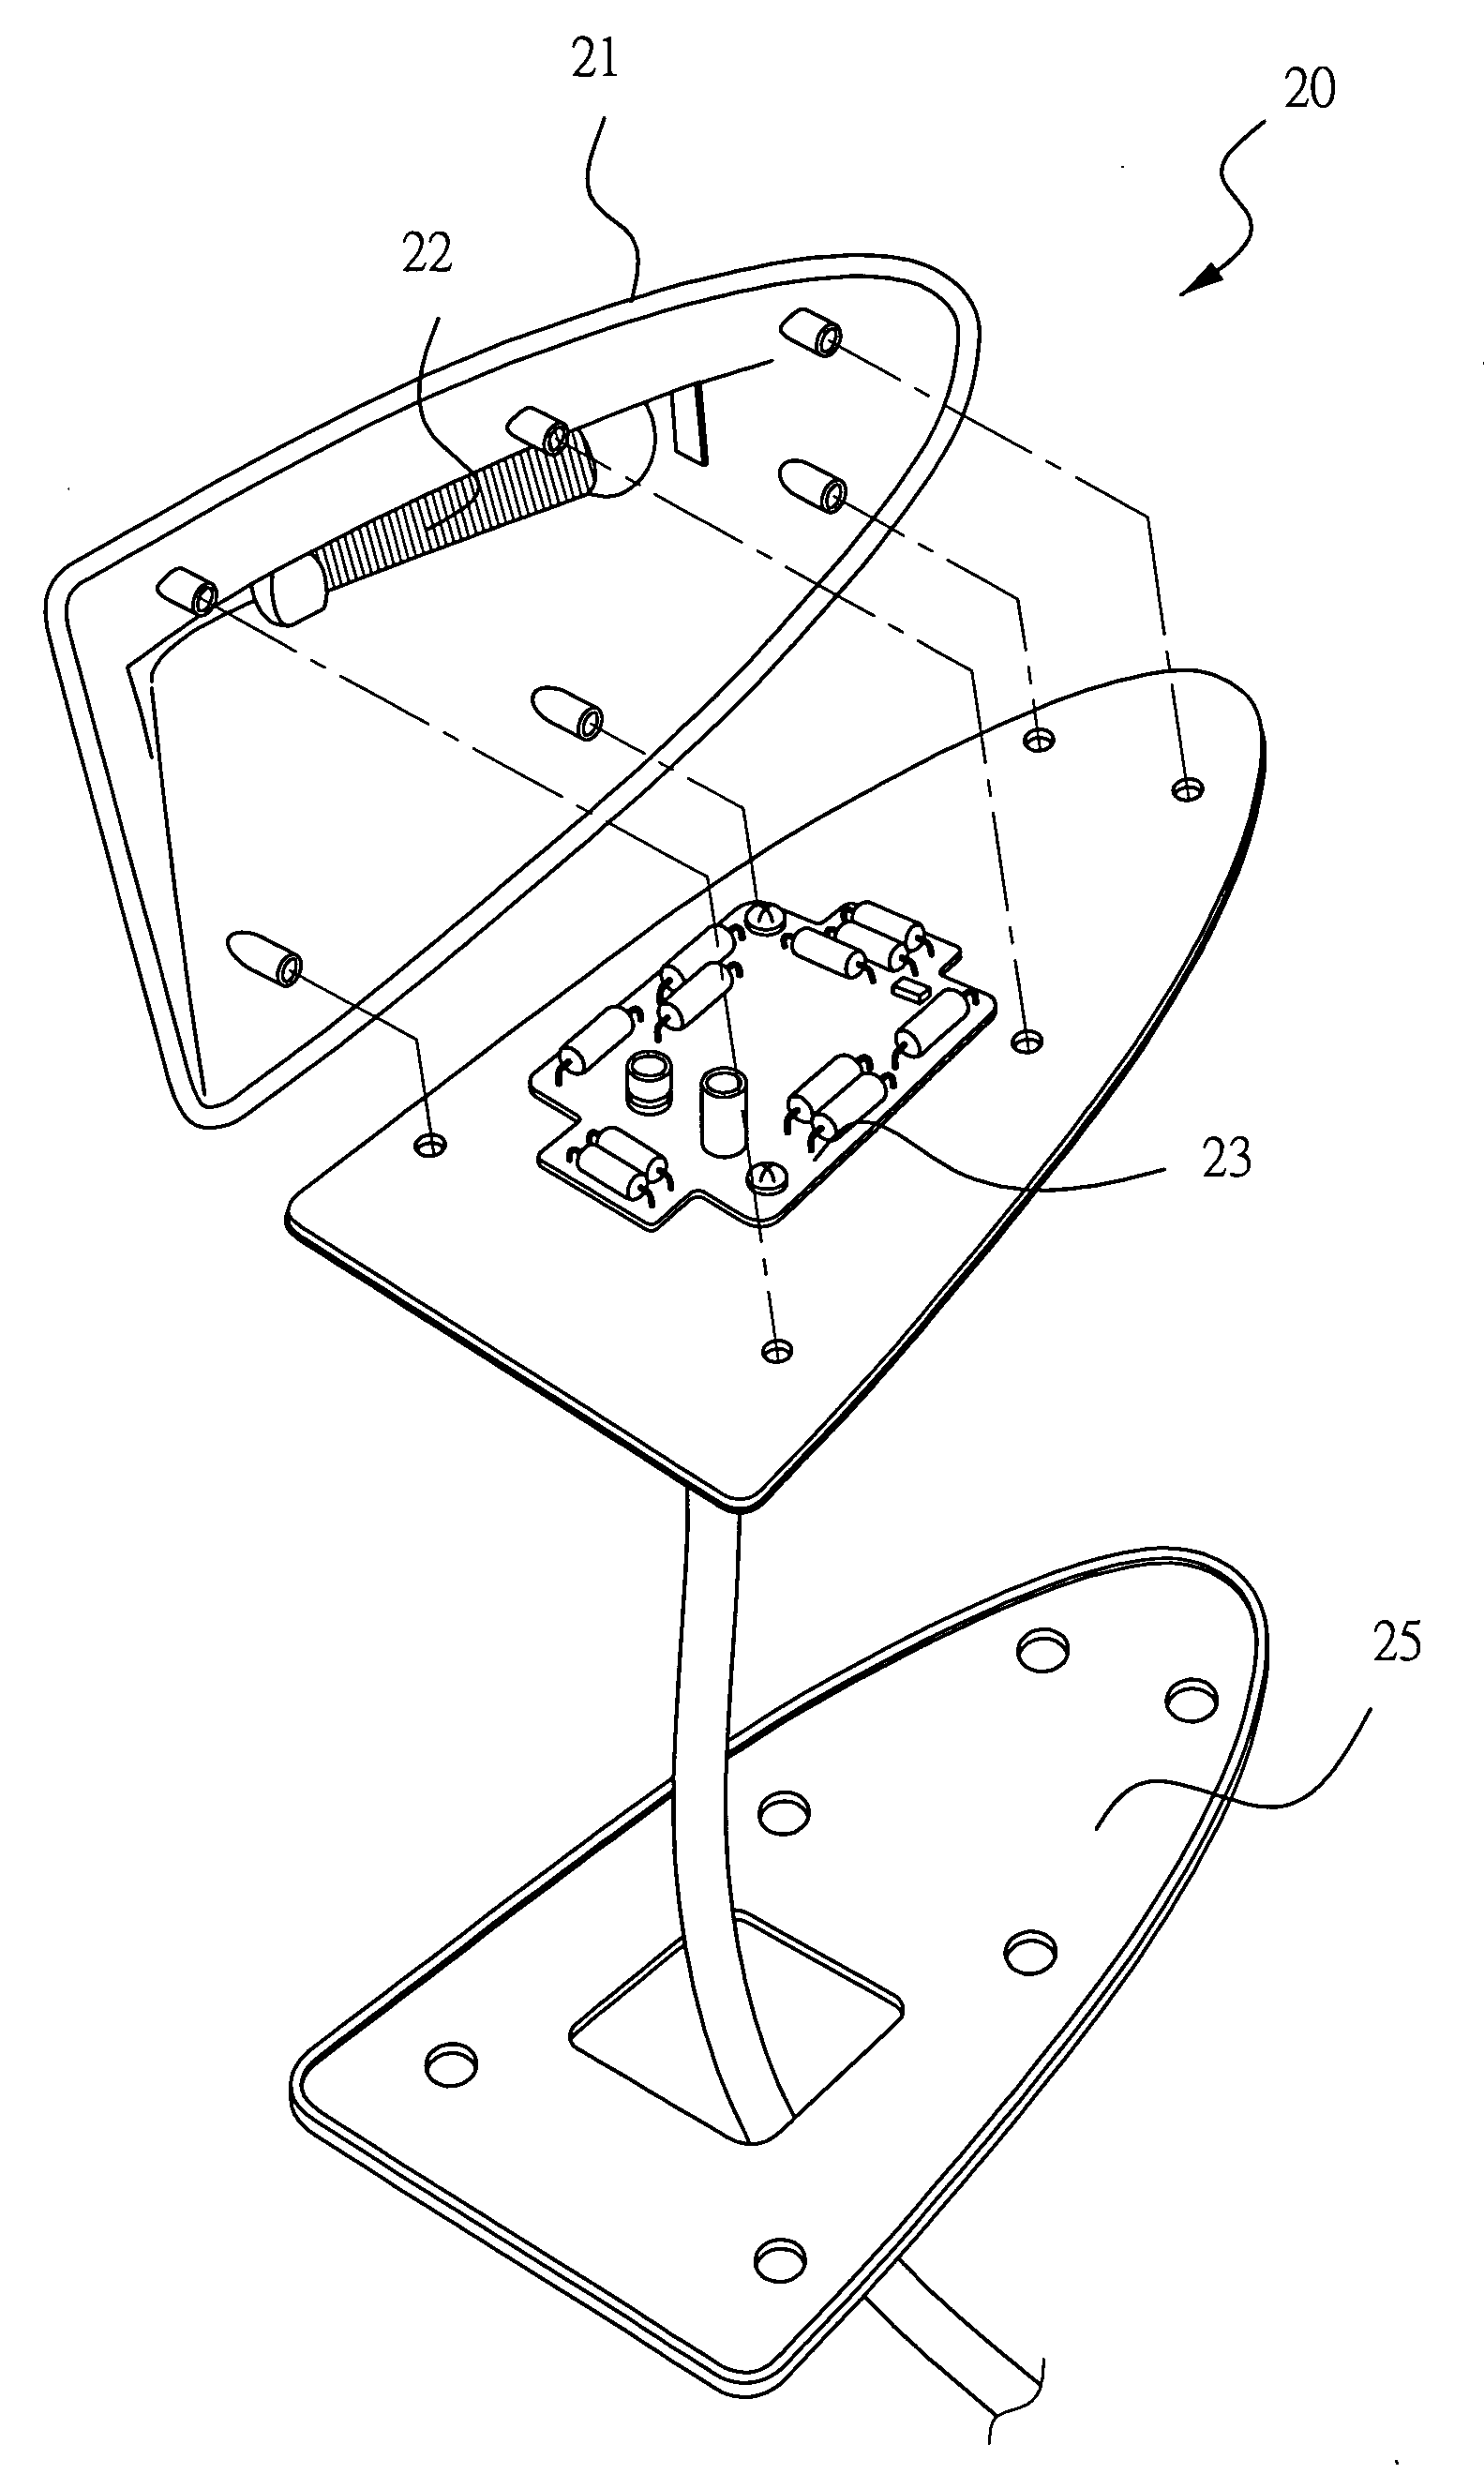 Fin-shaped antenna apparatus for vehicle radio application